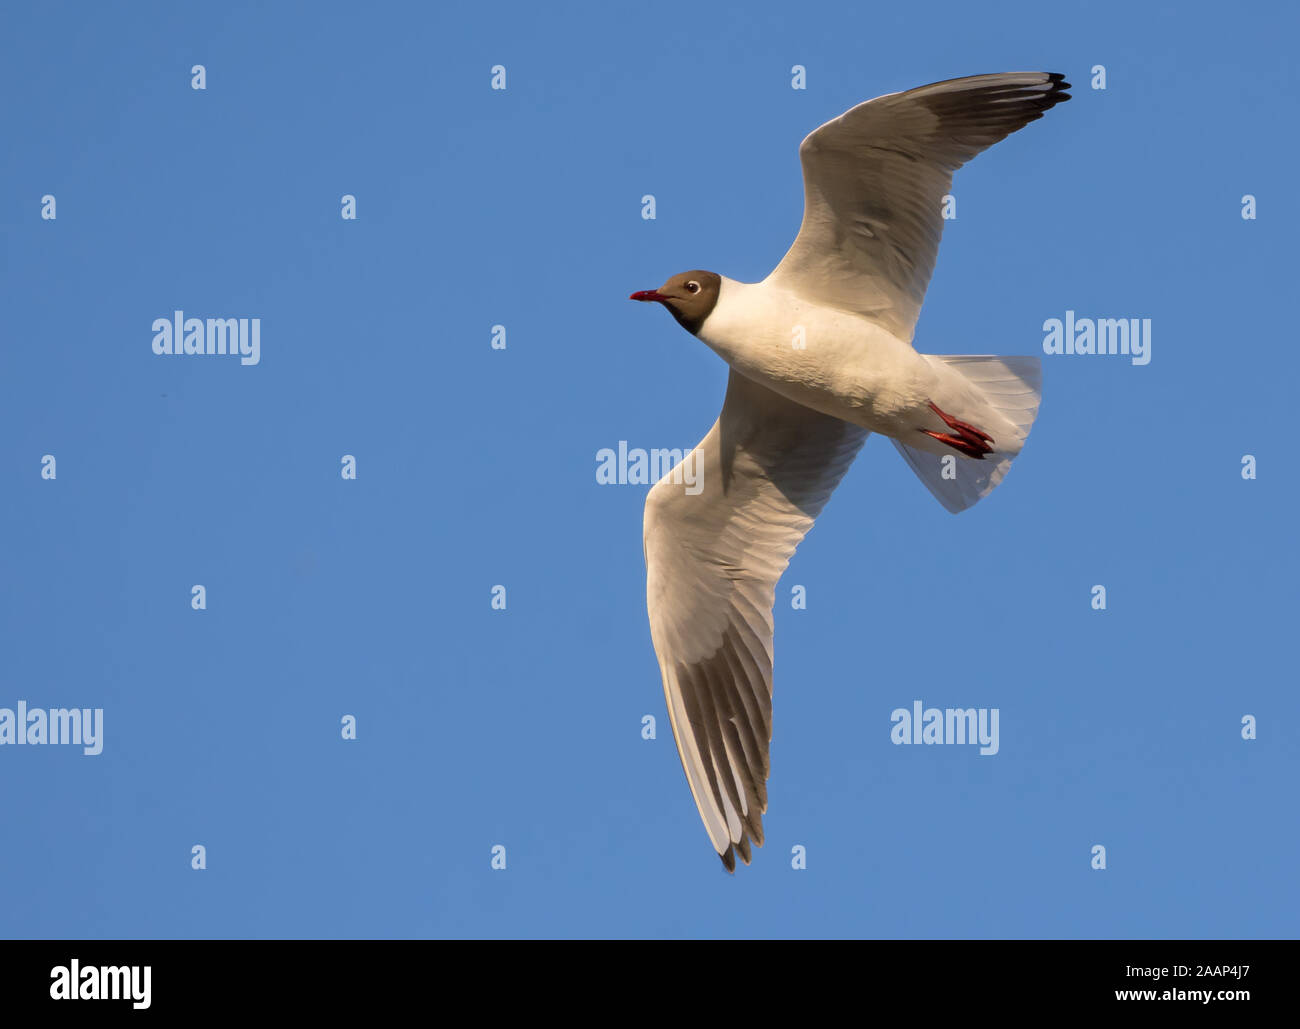 Black-headed gull fast fly over blue sky with spreaded wings Stock Photo